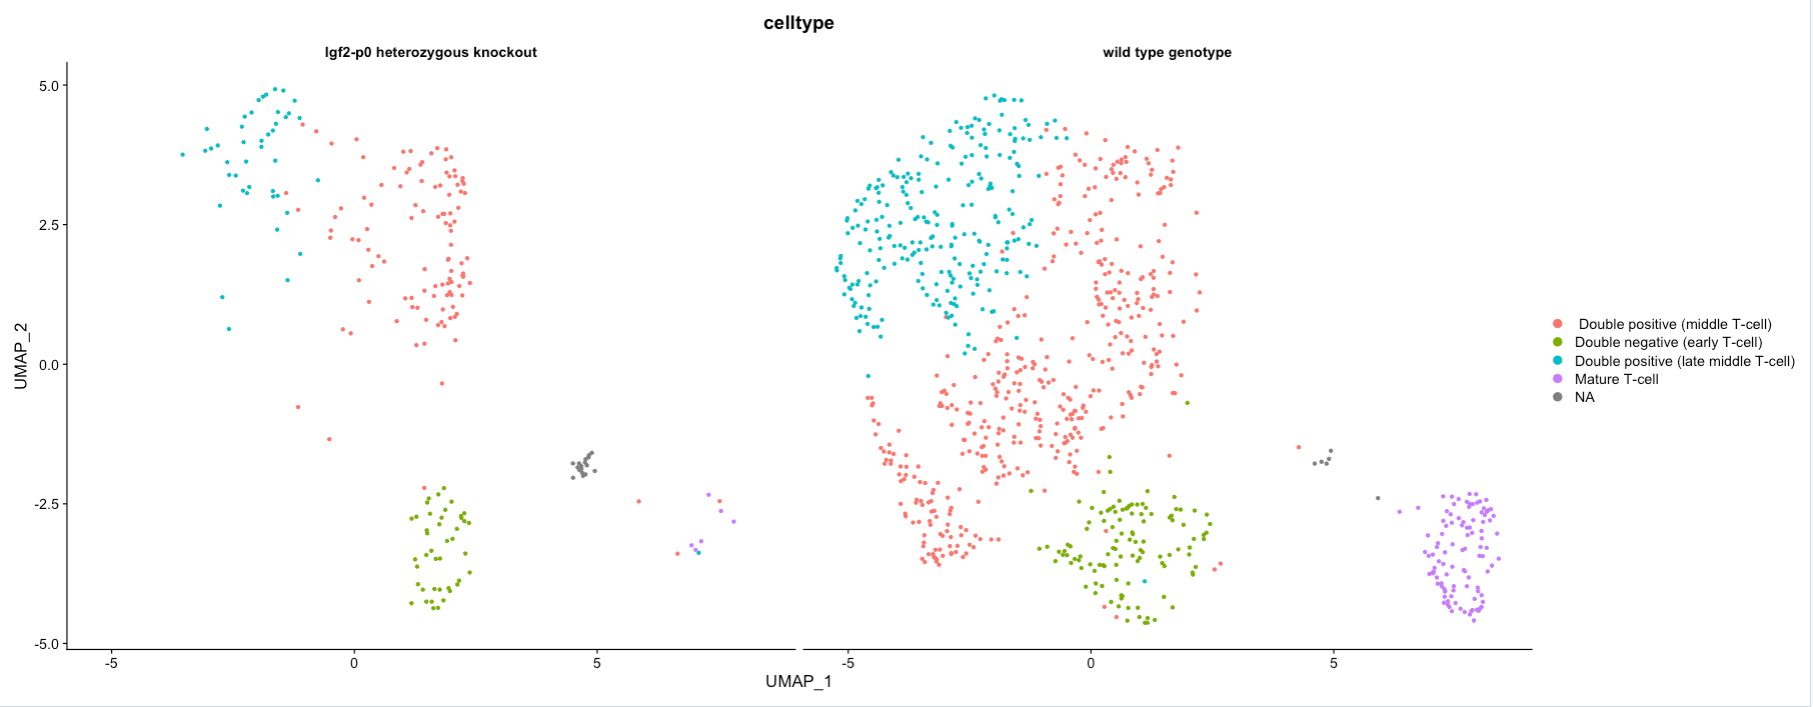 DimPlot colored by labelled celltype split by genotype. 